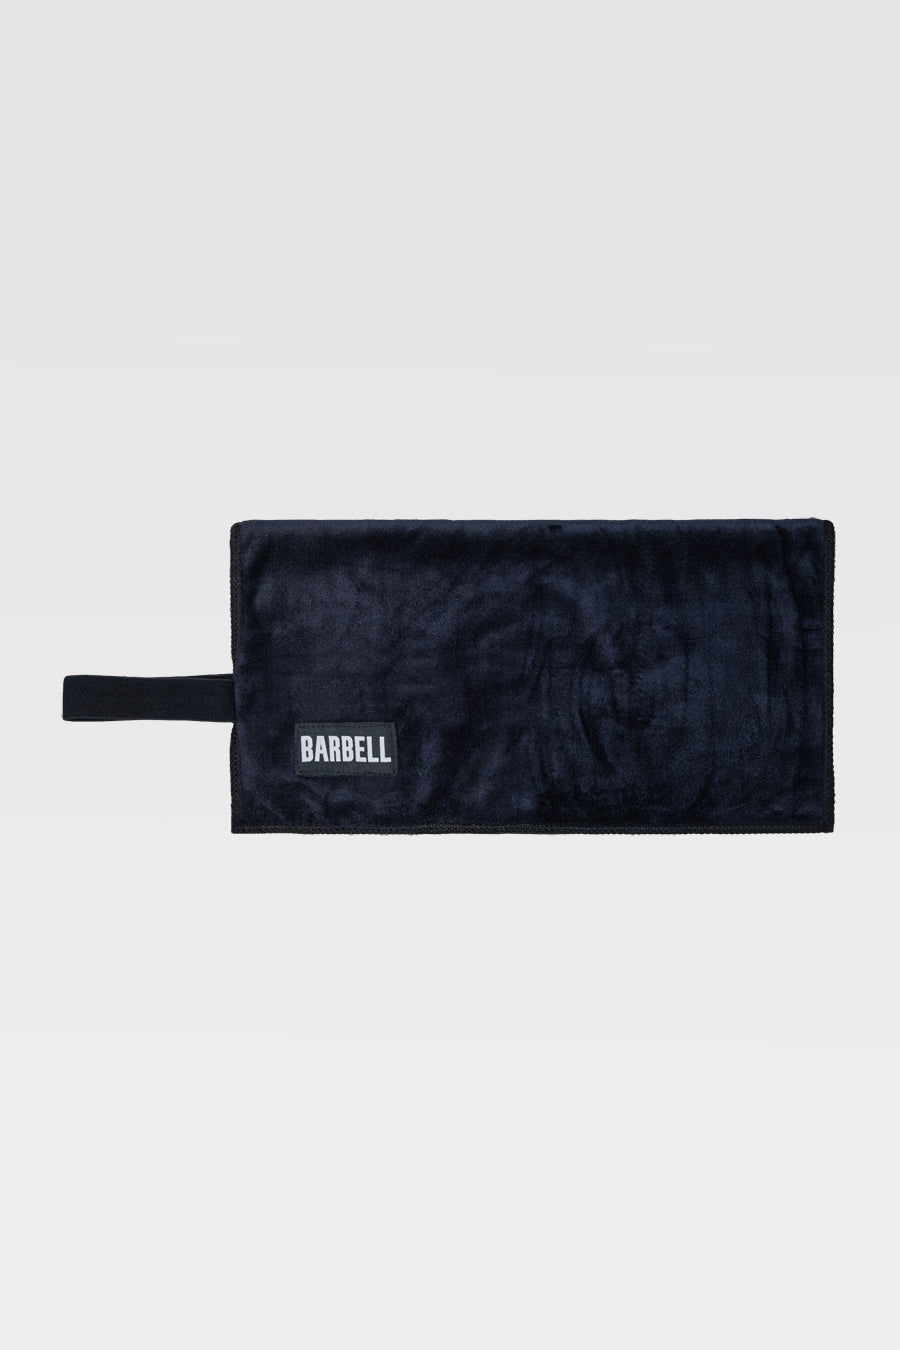 Barbell Gym Towel - Black - photo from front second angle #color_black